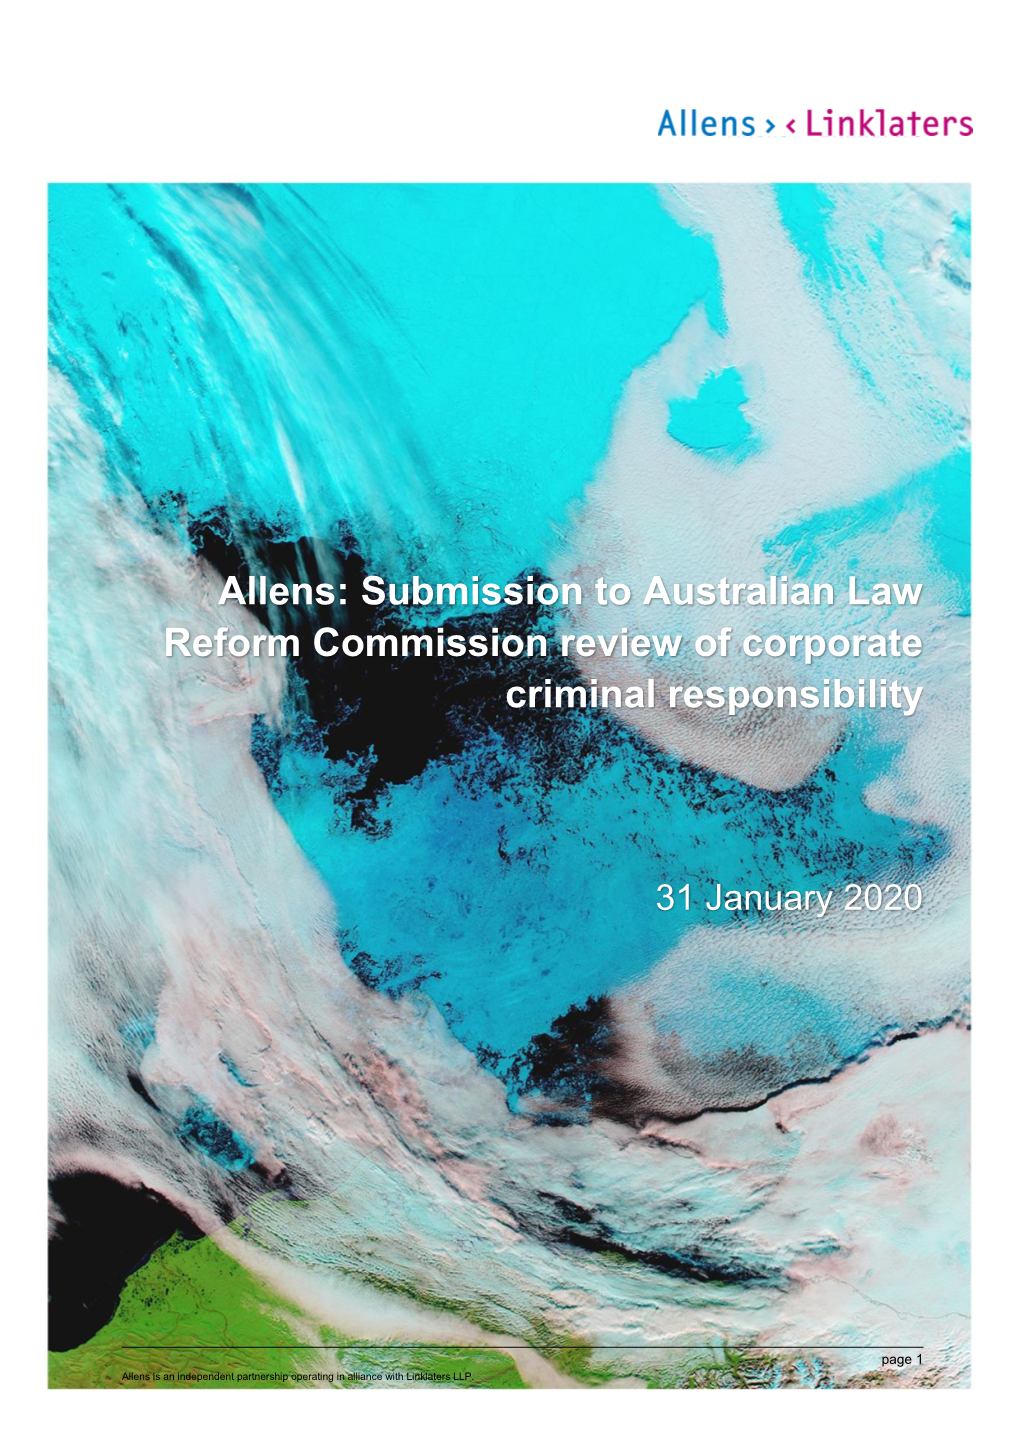 Allens: Submission to Australian Law Reform Commission Review of Corporate Criminal Responsibility